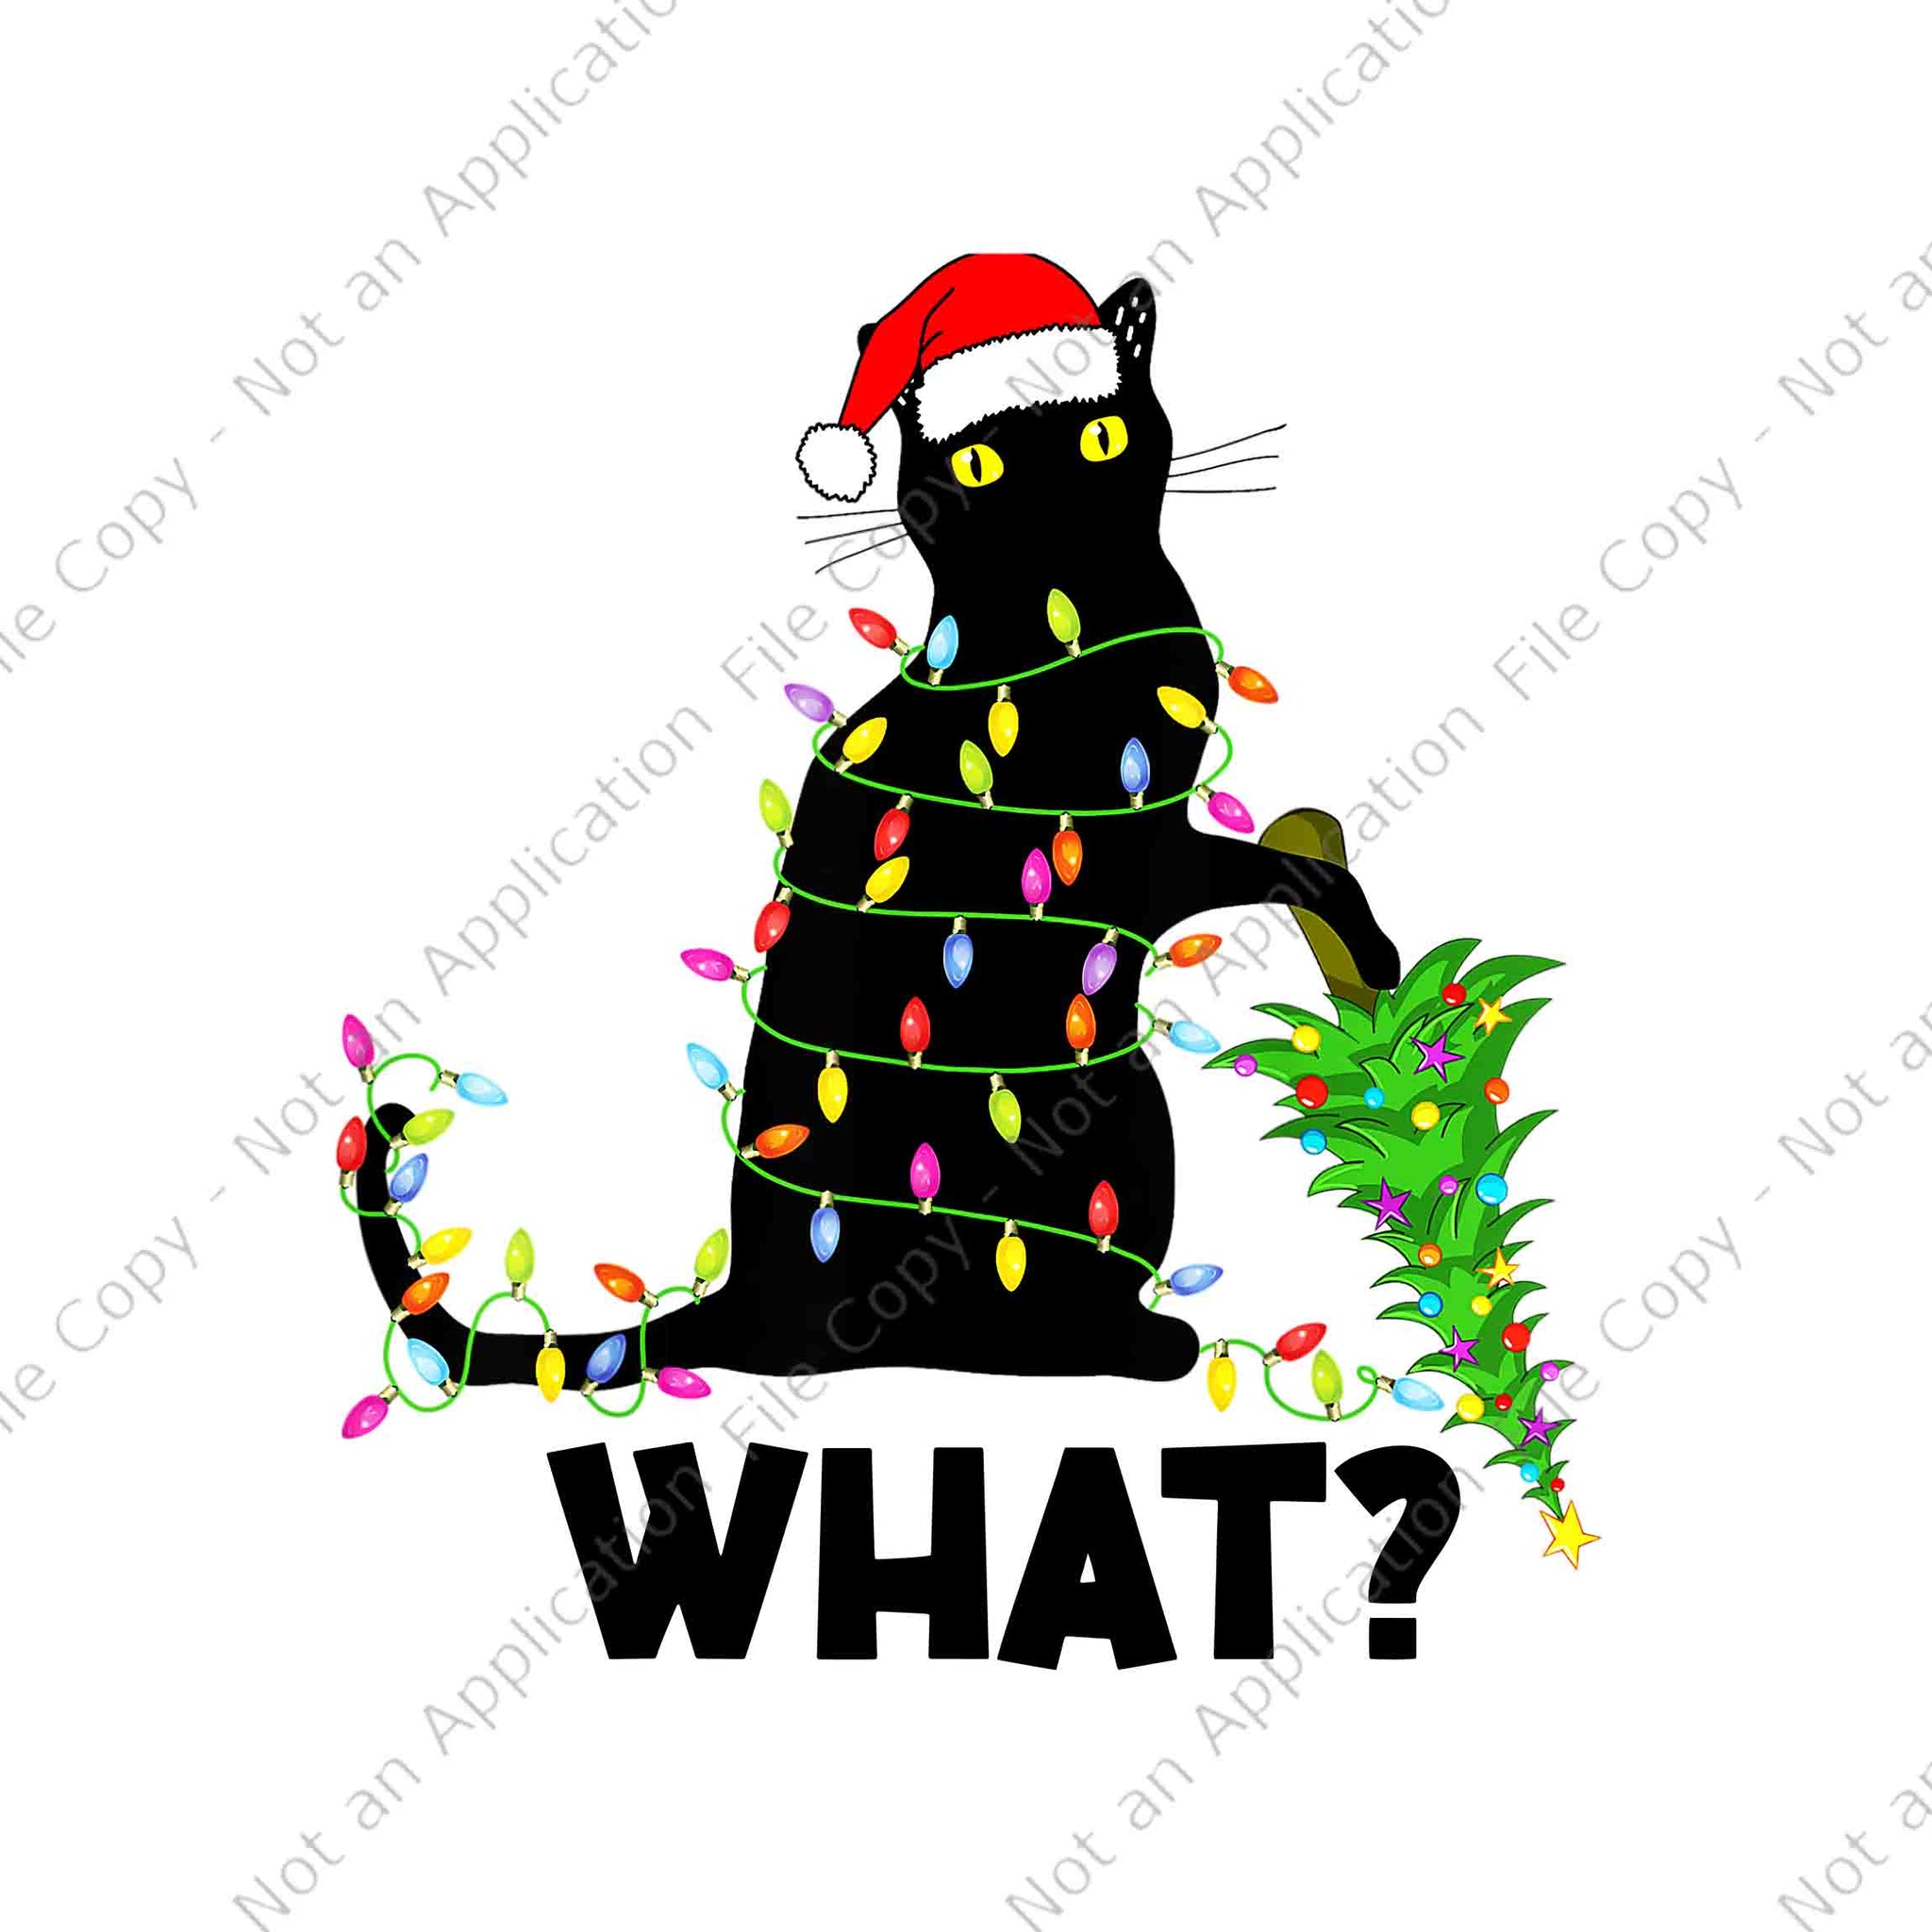 Black Cat Pushing Christmas Tree Over Cat Christmas Png, Black Cat Christmas Lights Png, Black Cat Christmas Png